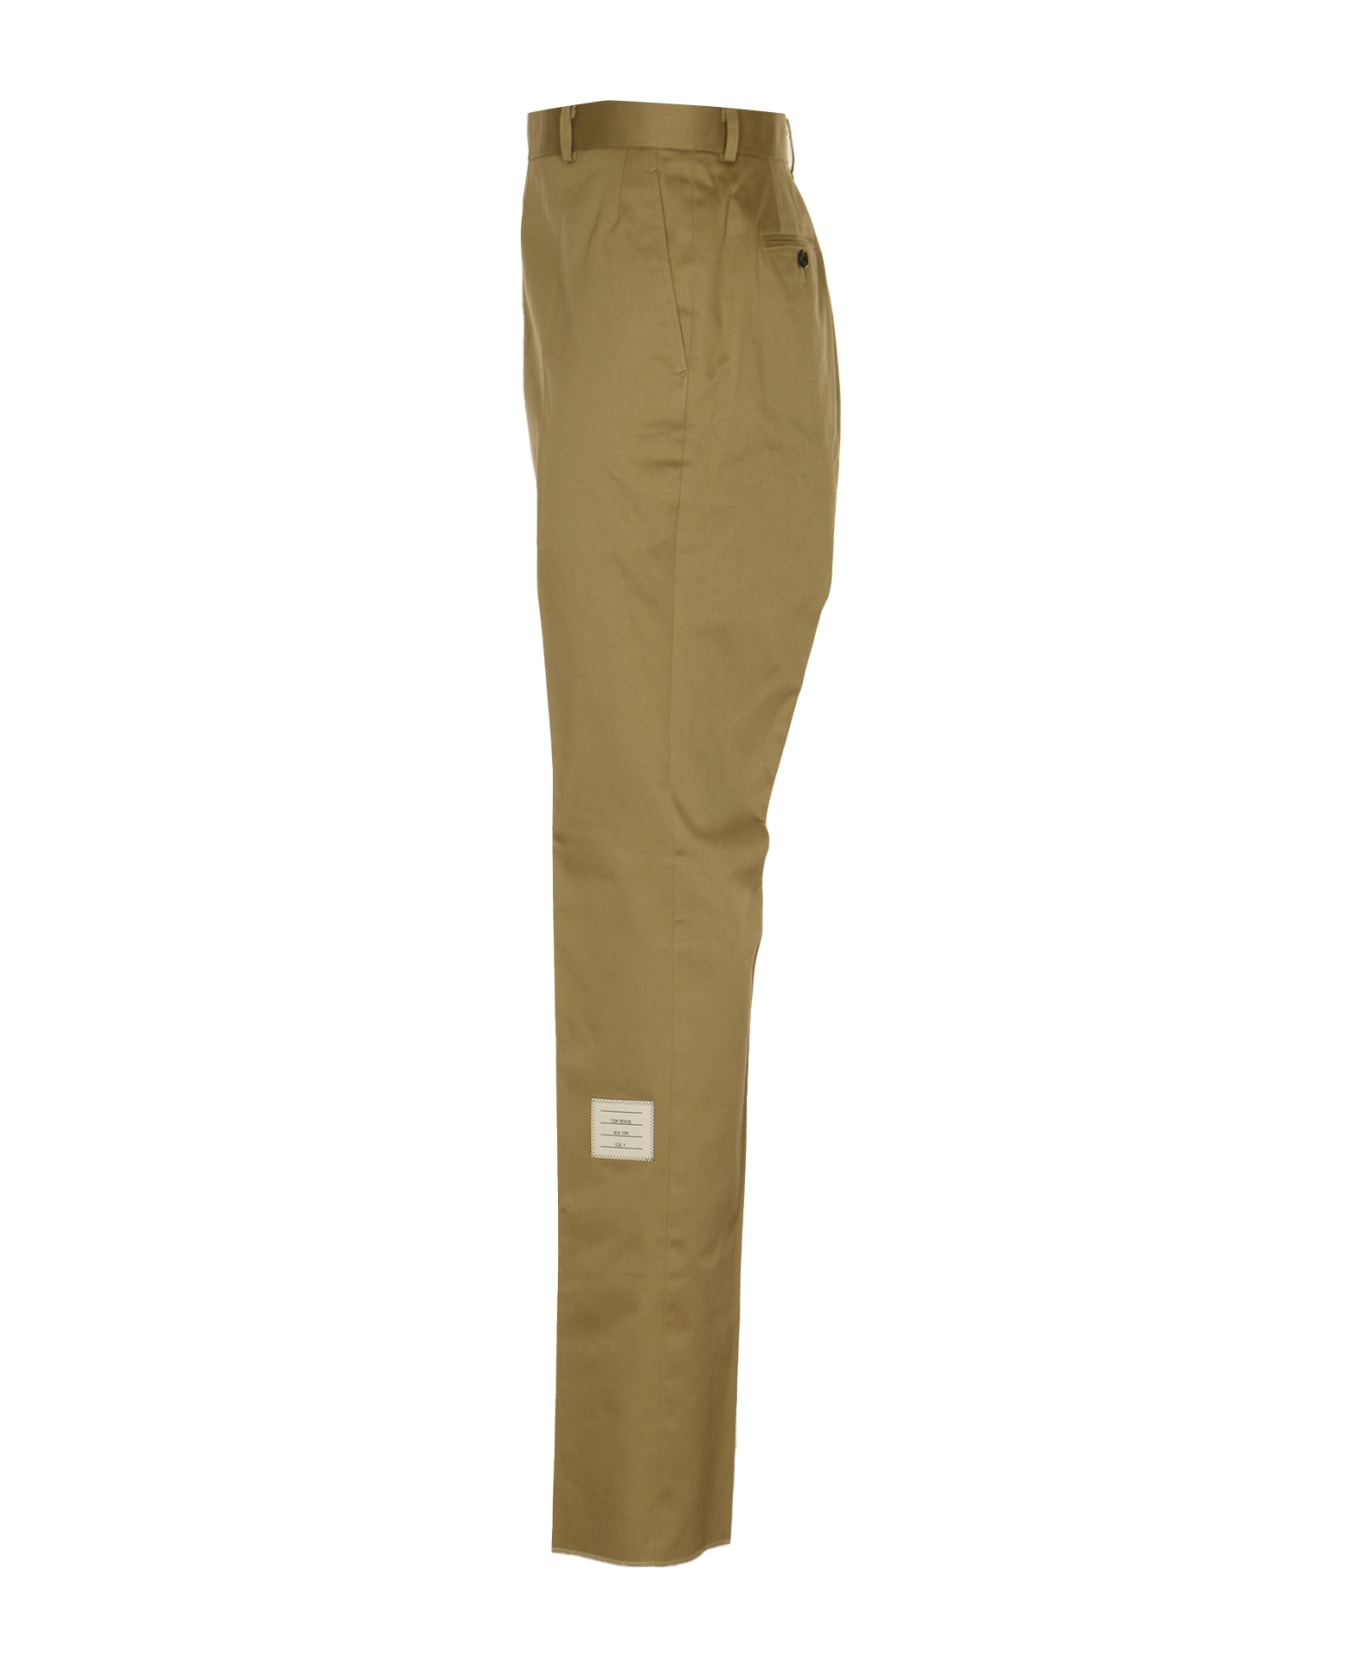 Thom Browne Unconstructed Chino Trousers - Camel